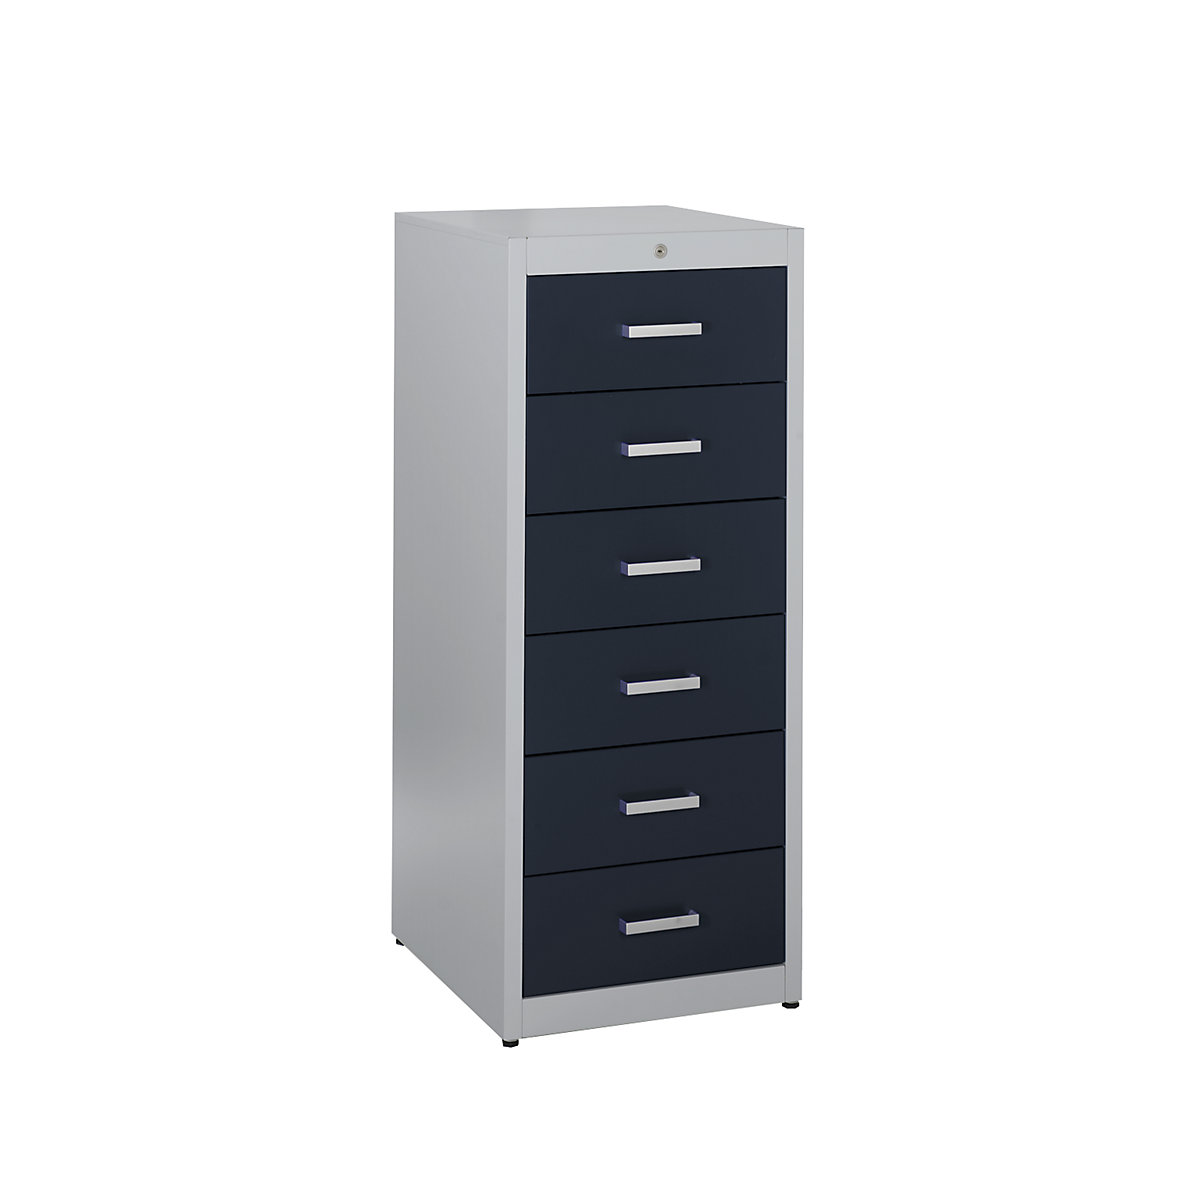 Card file cabinet, bar handles – mauser, 6 drawers, soft retraction mechanism, 2-track, white aluminium / charcoal-5